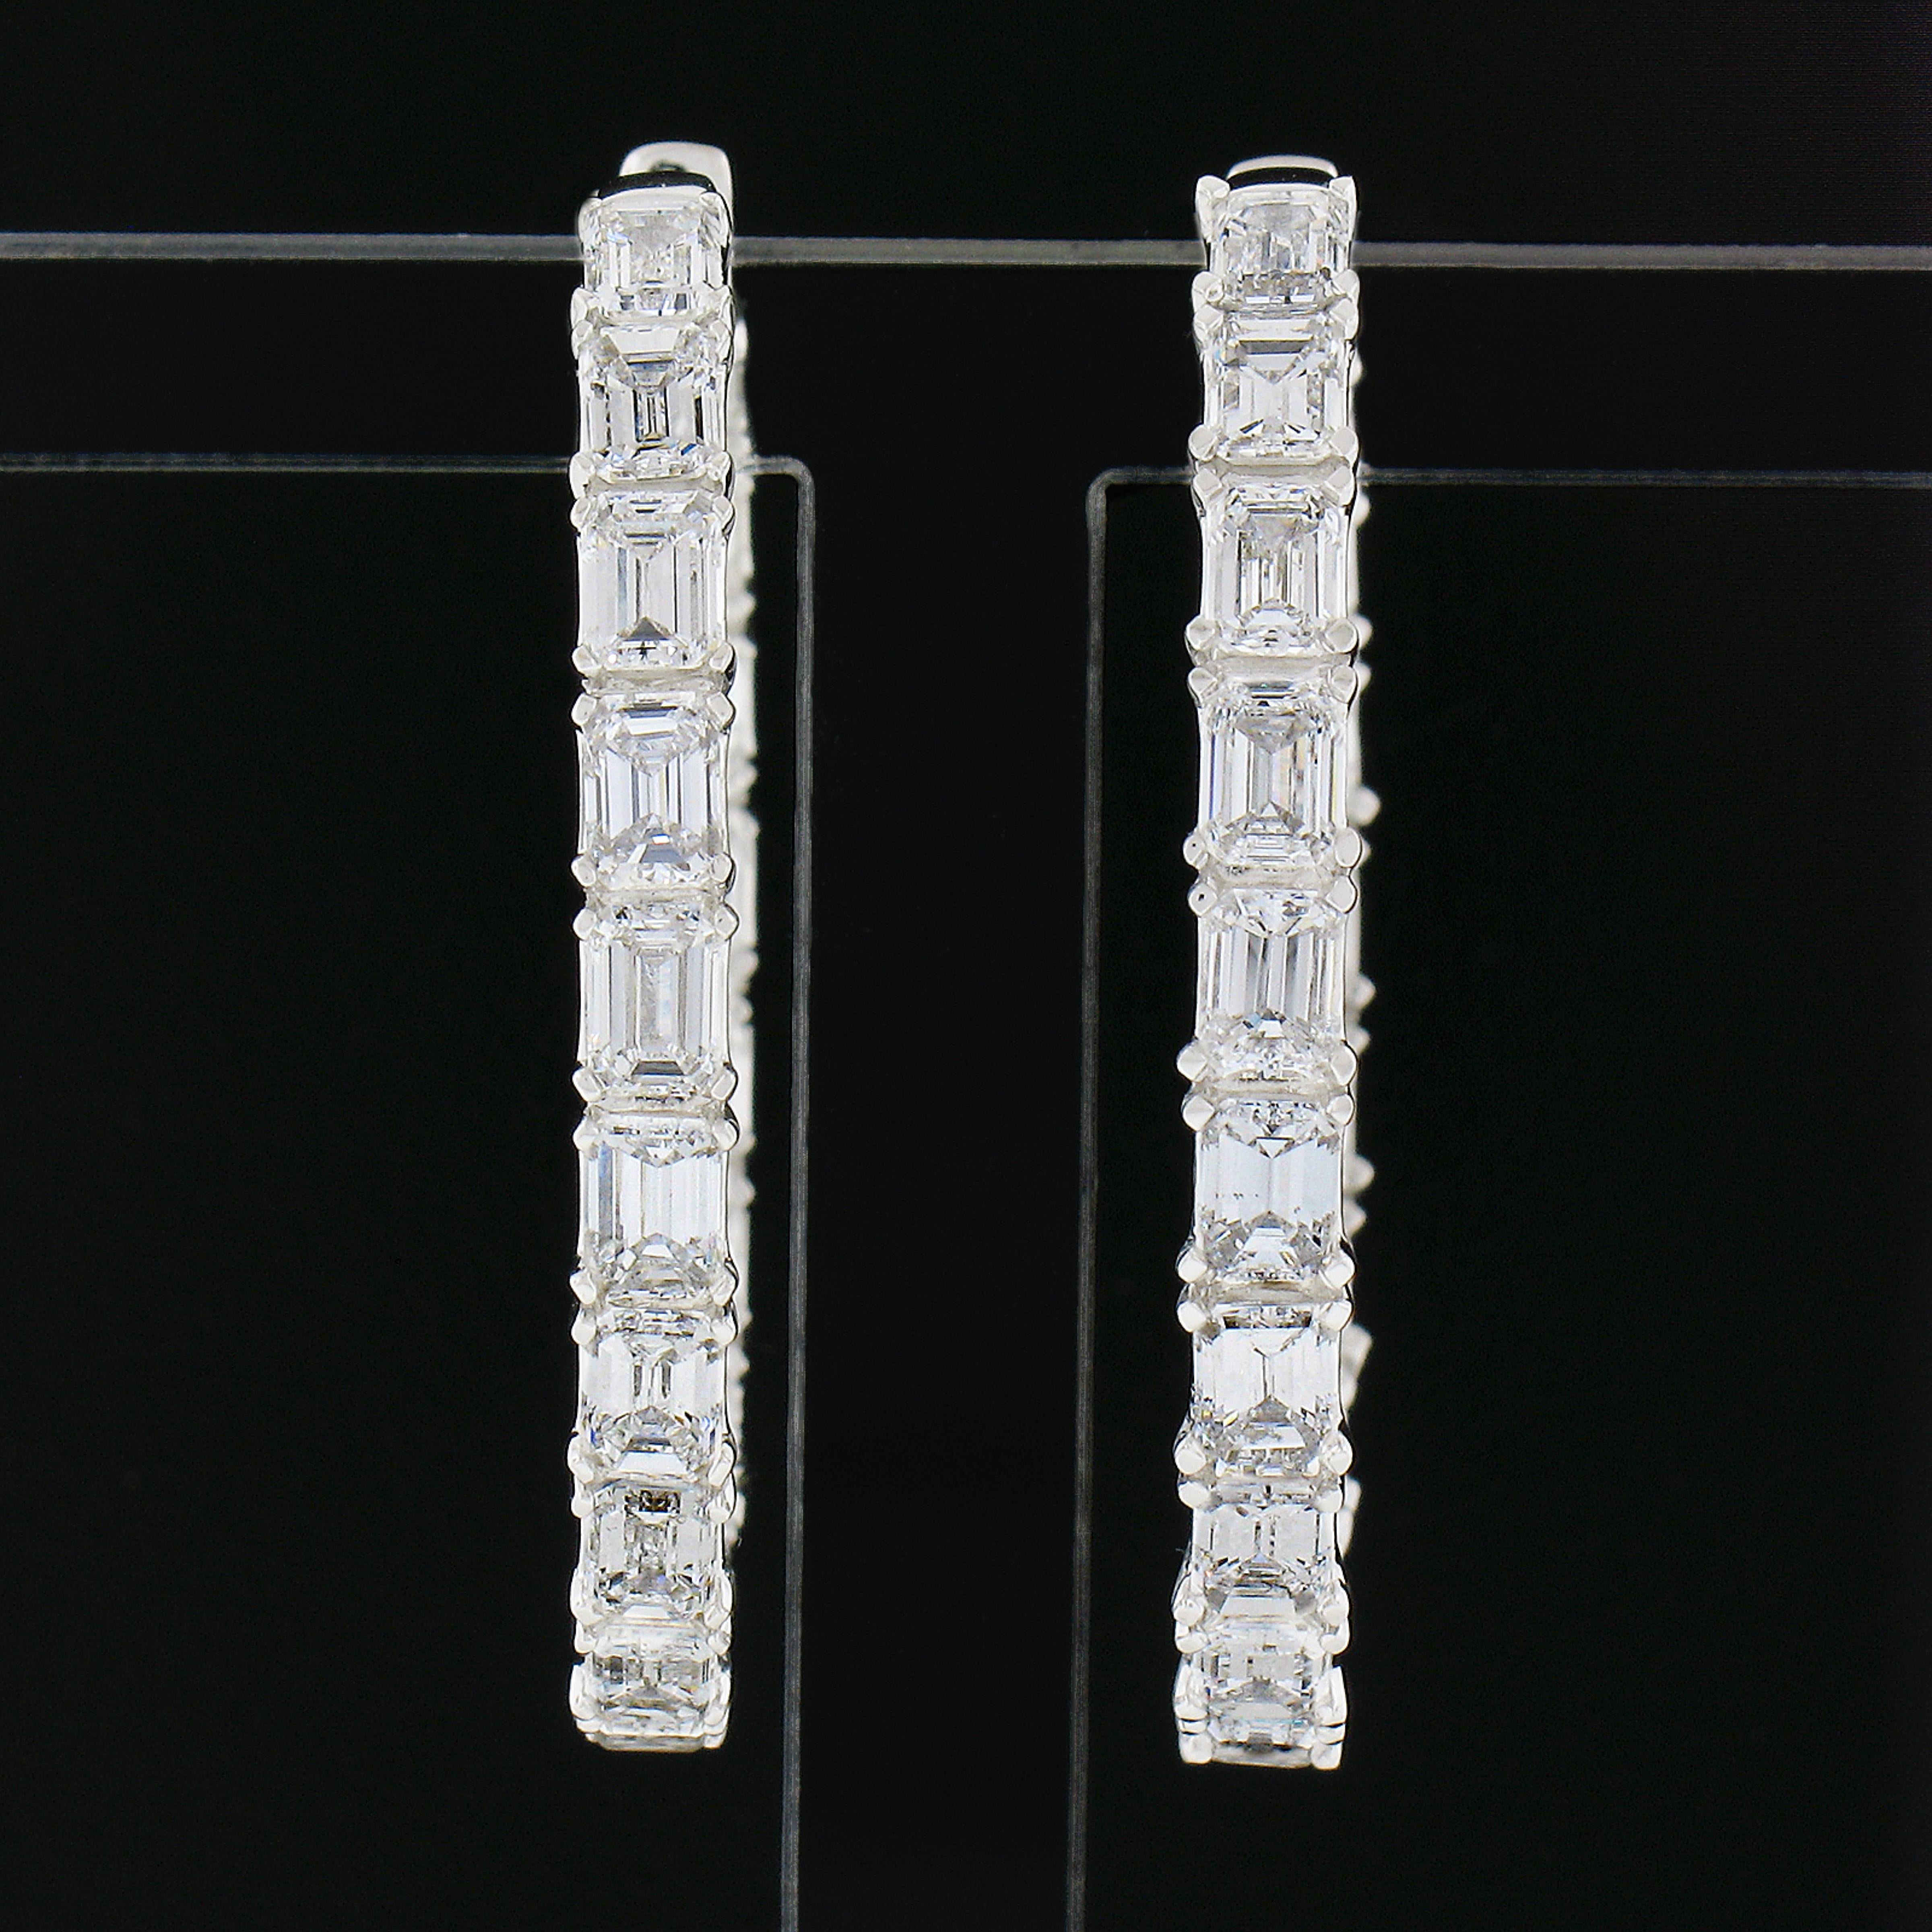 These stunning, super elegant and rich looking hoop earrings are crafted in solid 14k white gold and set with approximately 5 carats of the finest quality emerald cut diamonds throughout the oval in and out design. These top quality diamonds are